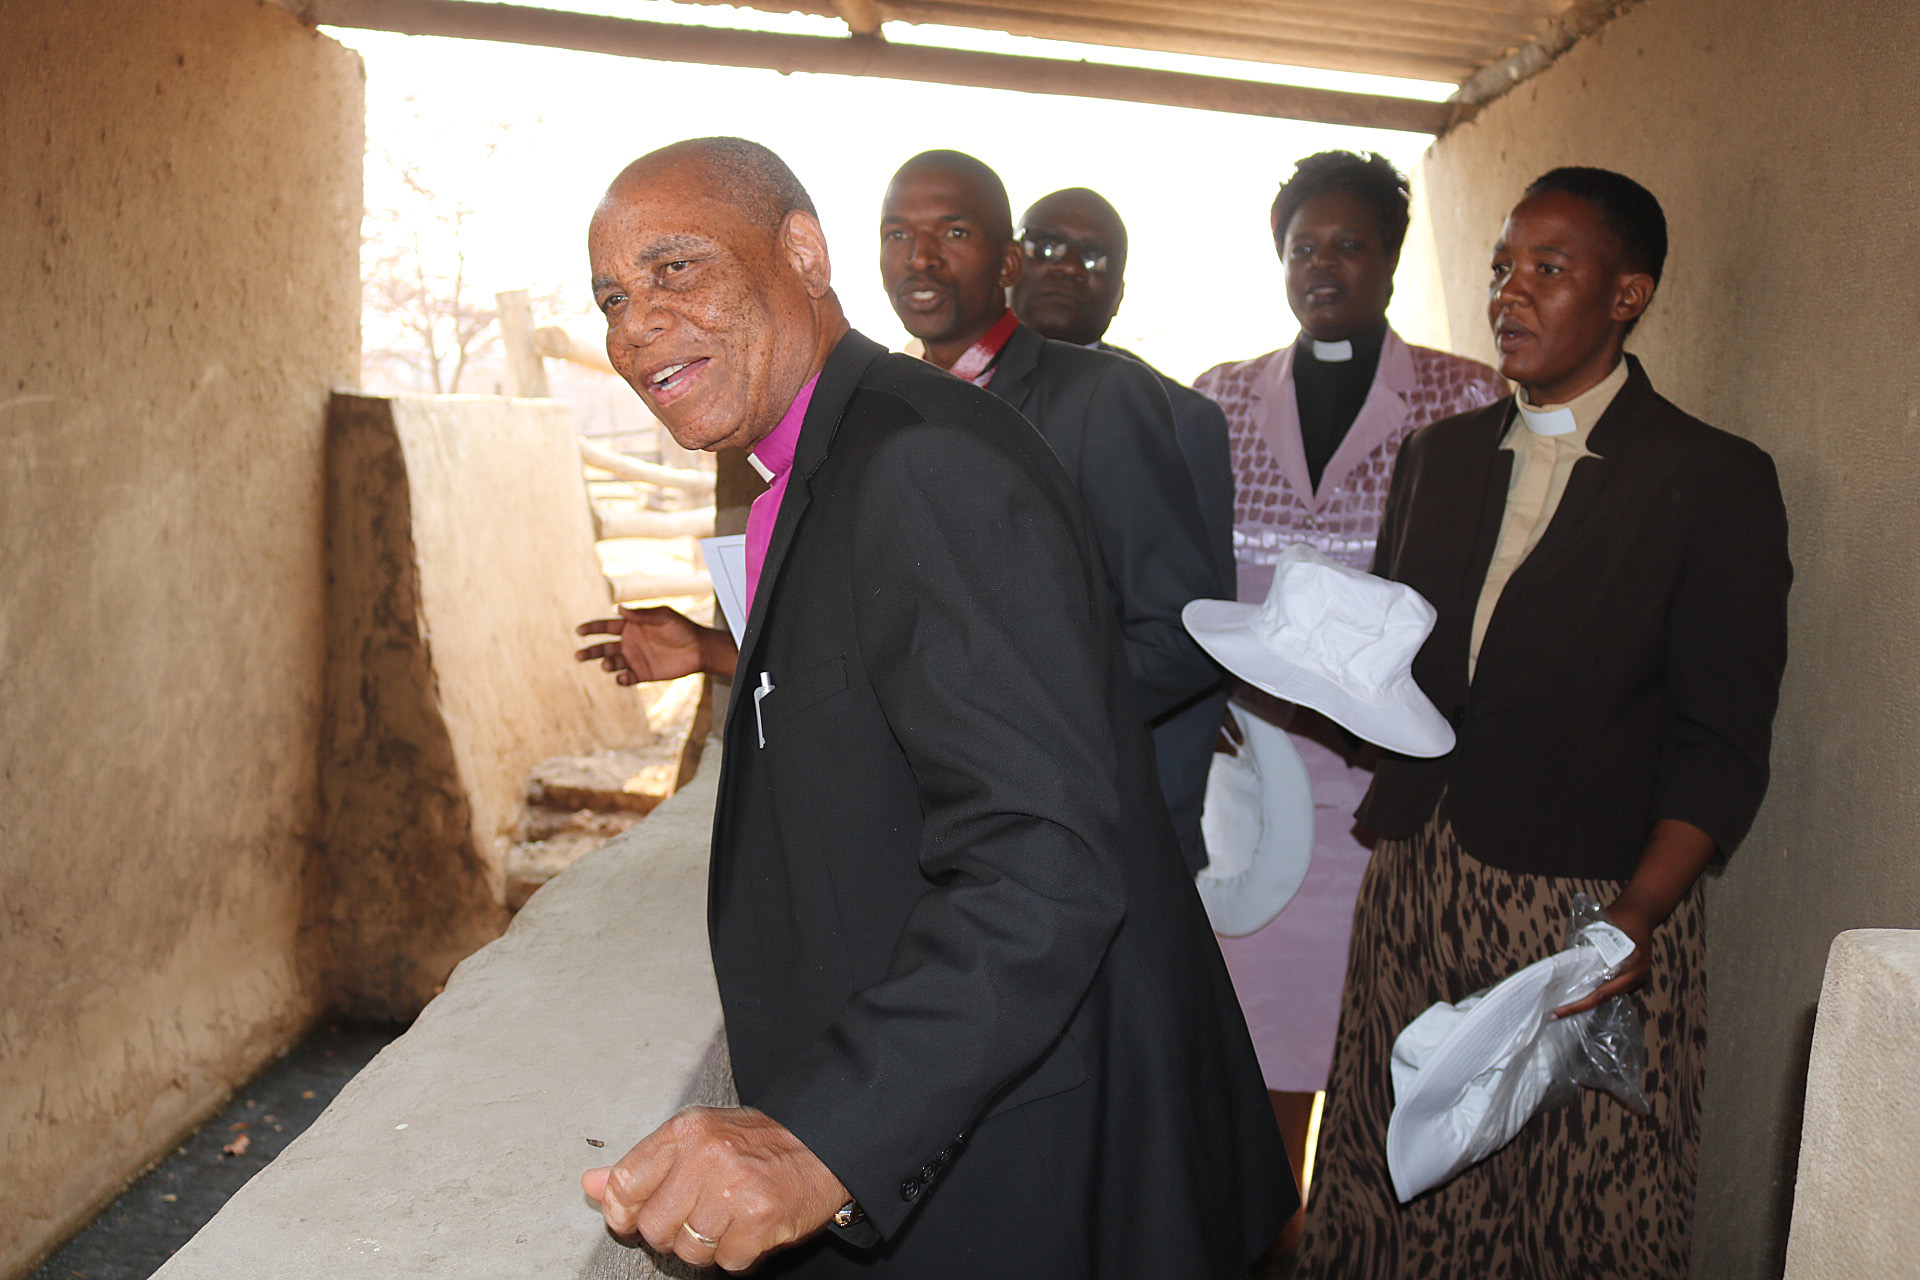 Zimbabwe Resident Bishop Eben K. Nhiwatiwa inspects the inside of the cattle dip tank. The dip tank was built by the church with funding from the Chabadza Community Development Program, a partnership between The United Methodist Church in Norway and Zimbabwe. Photo by Eveline Chikwanah, UMNS. 